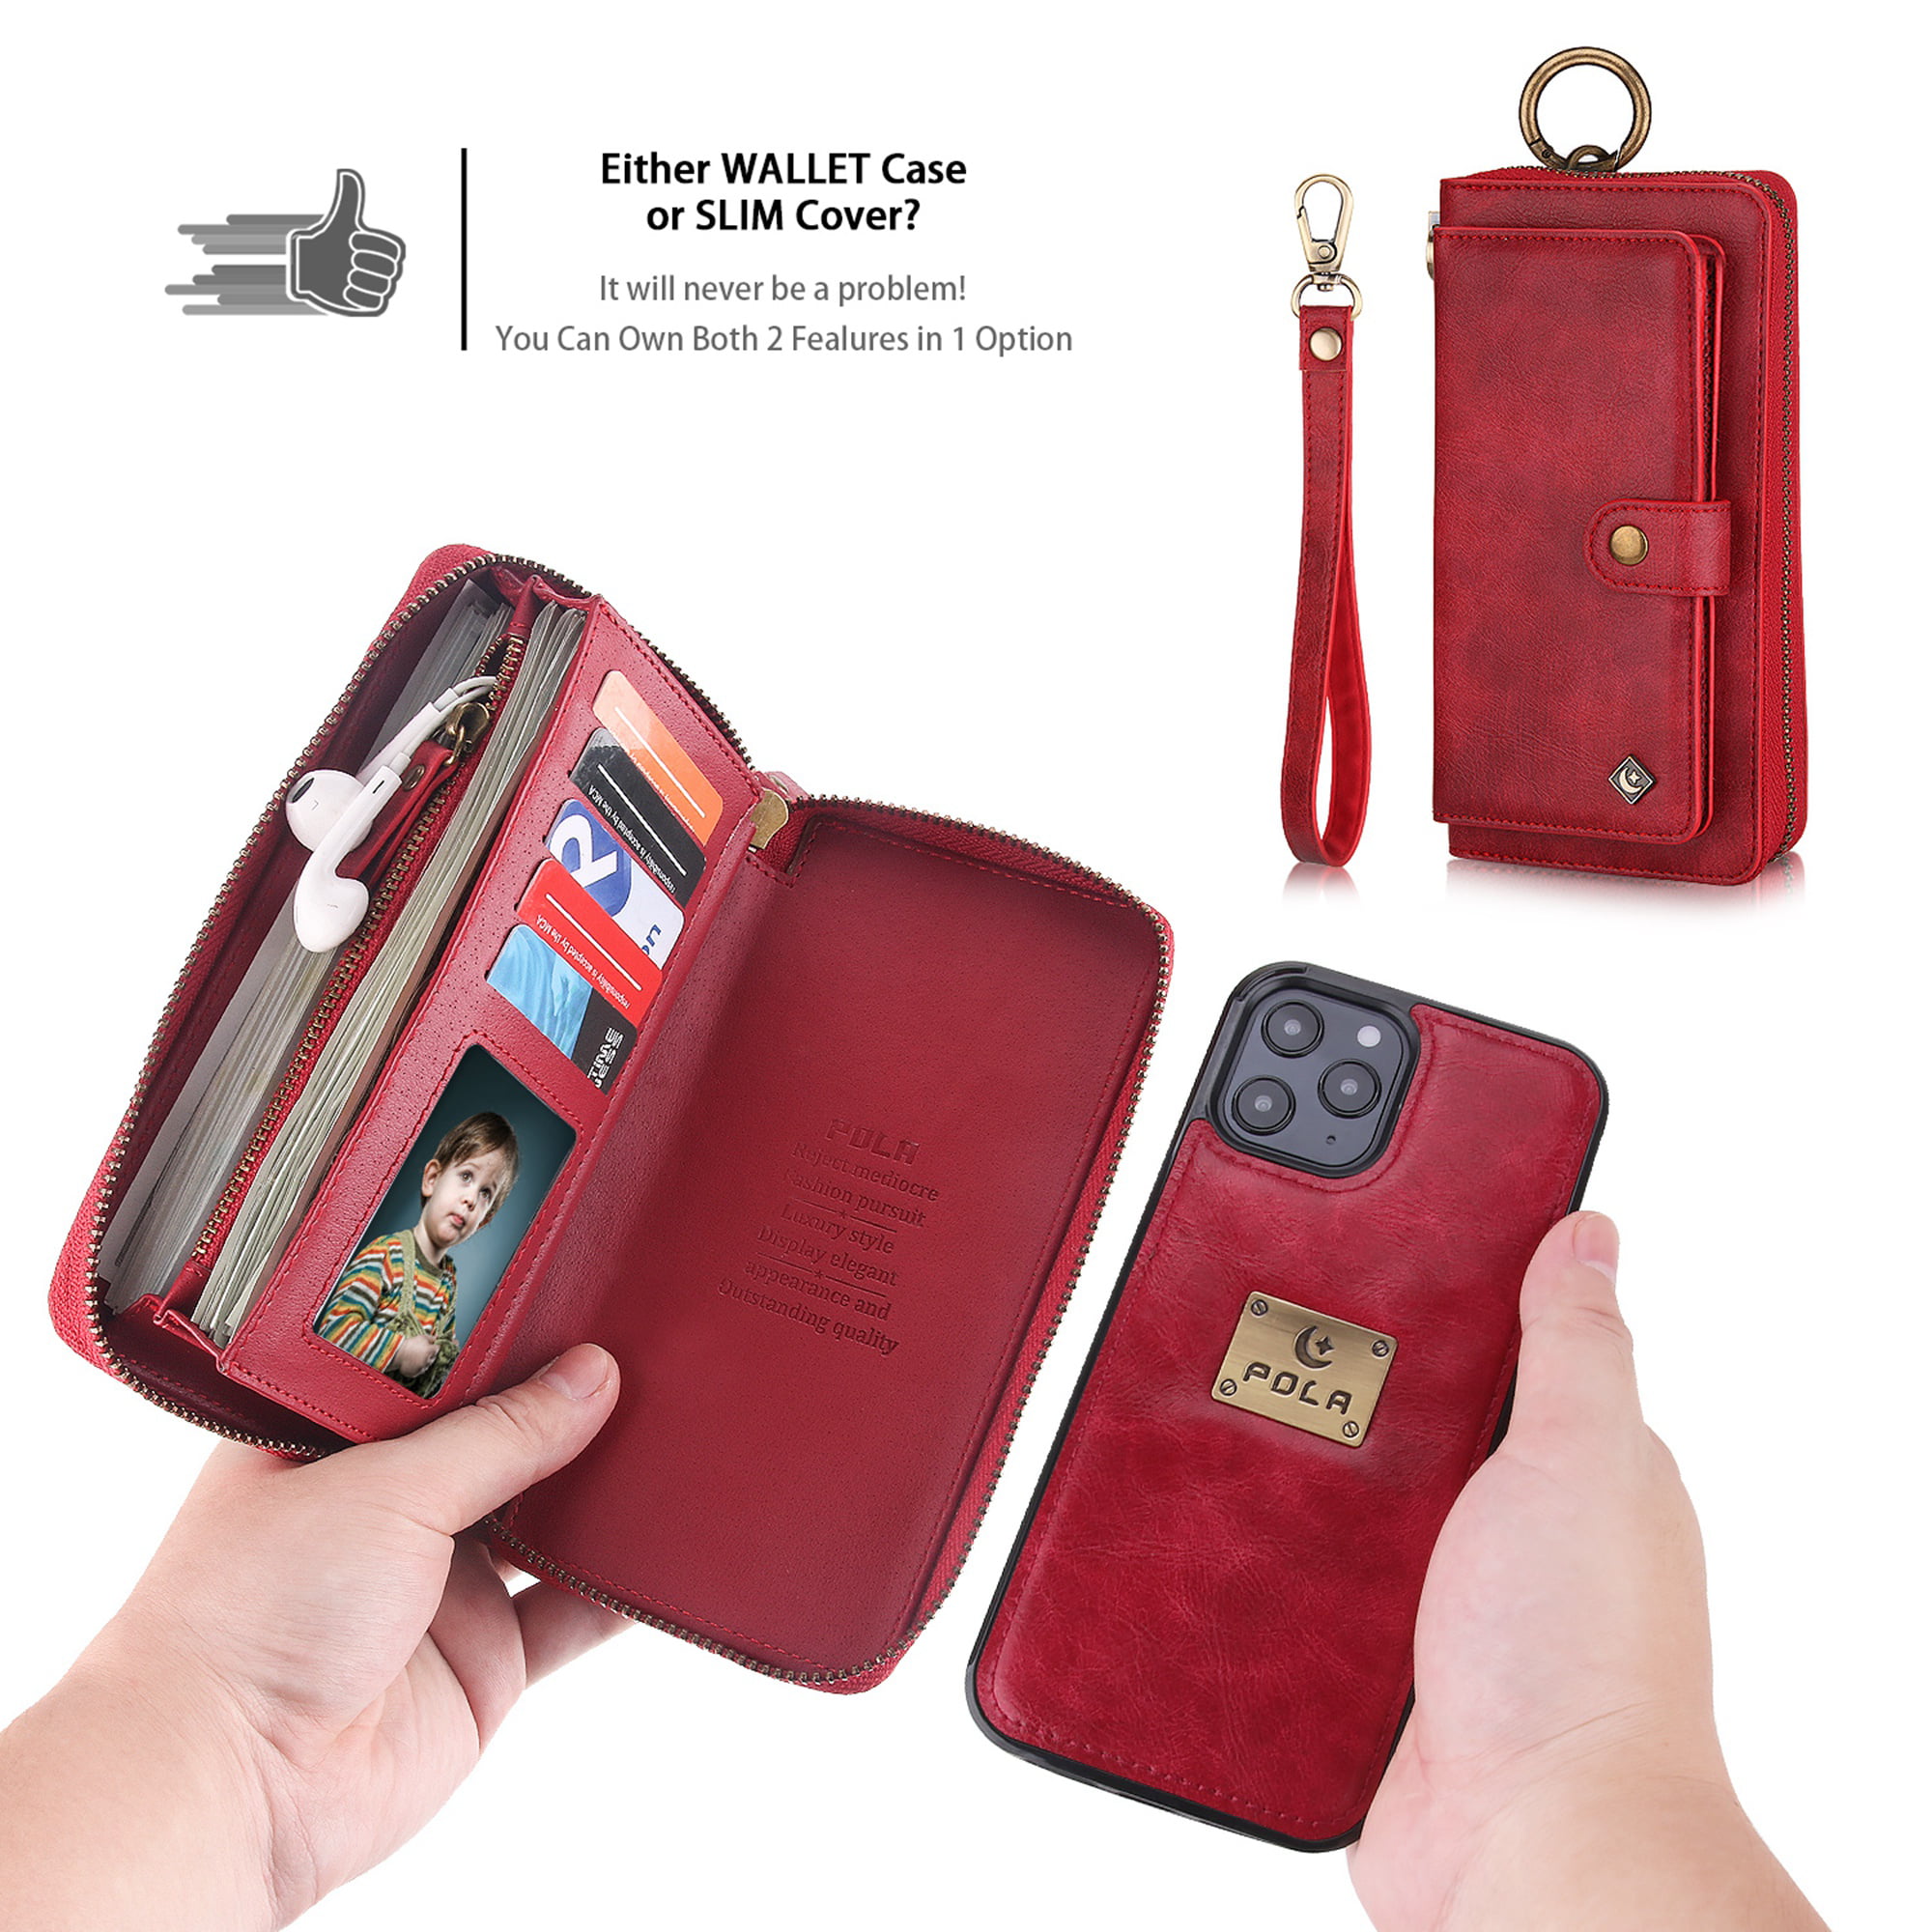 Dteck iPhone XR Case with Zipper Wallet, Painted PU Leather Folio Case 9  Card Slots Wallet Case with Zipper Pocket / Hand Strap for iPhone XR